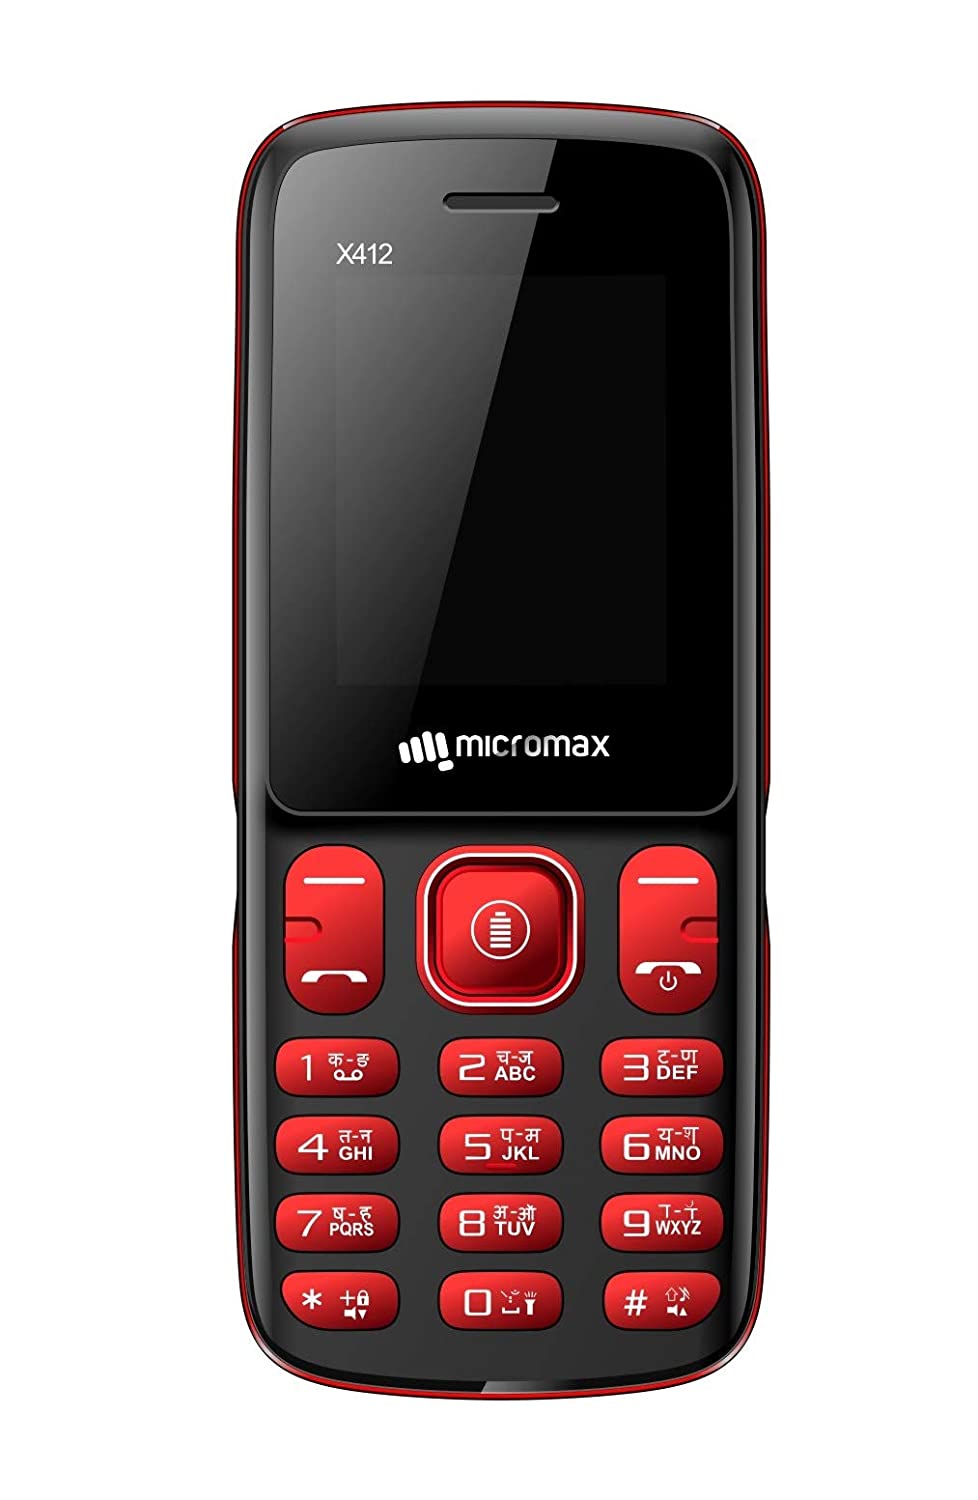 Micromax X412 (Black + Red) 1.77 inch screen, video & music player 800 mAh battery-Mobile Phones-dealsplant